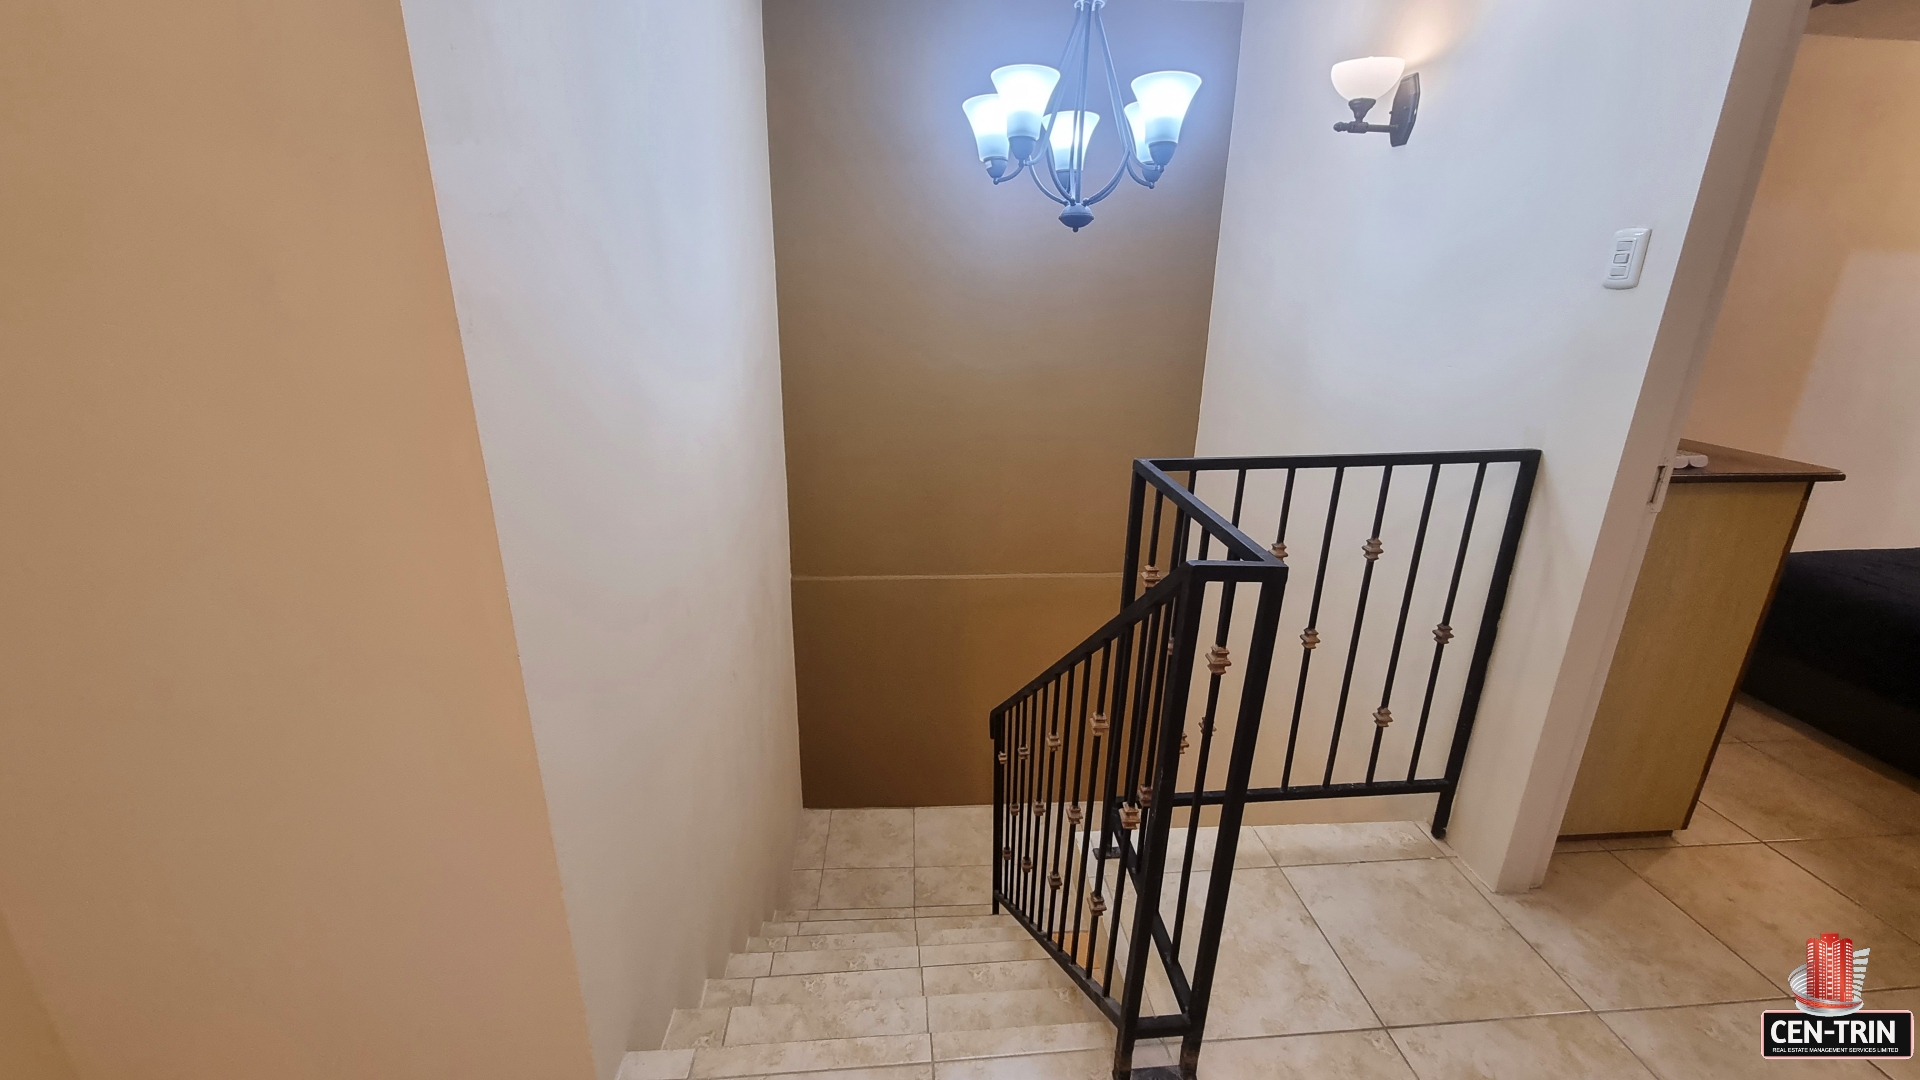 Staircase with wrought iron railing and chandelier in townhouse for sale.